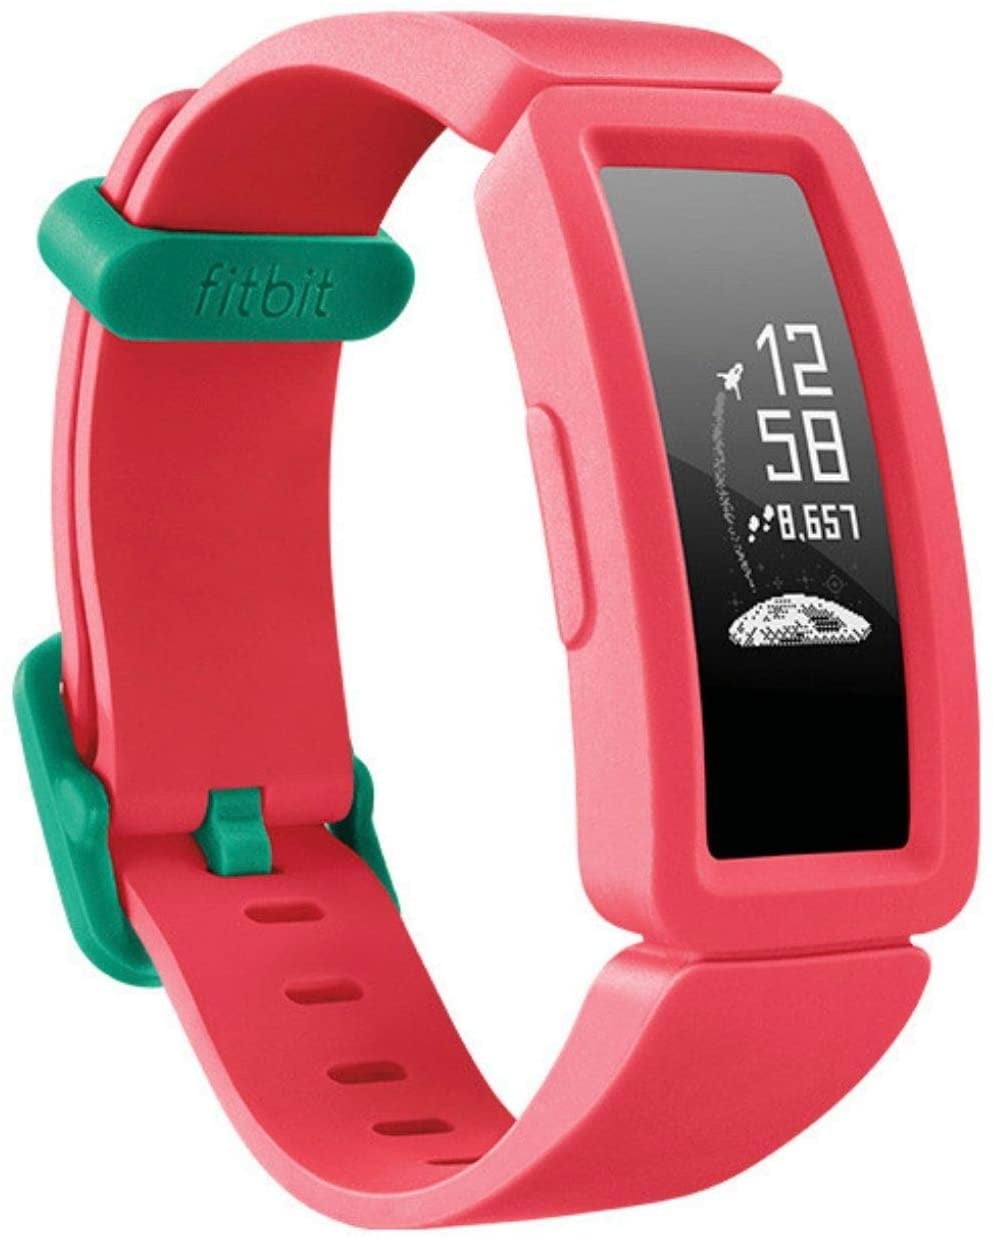 Fitbit Ace 2 Activity Tracker for Kids, 1 CountColor: Watermelon + Teal ...